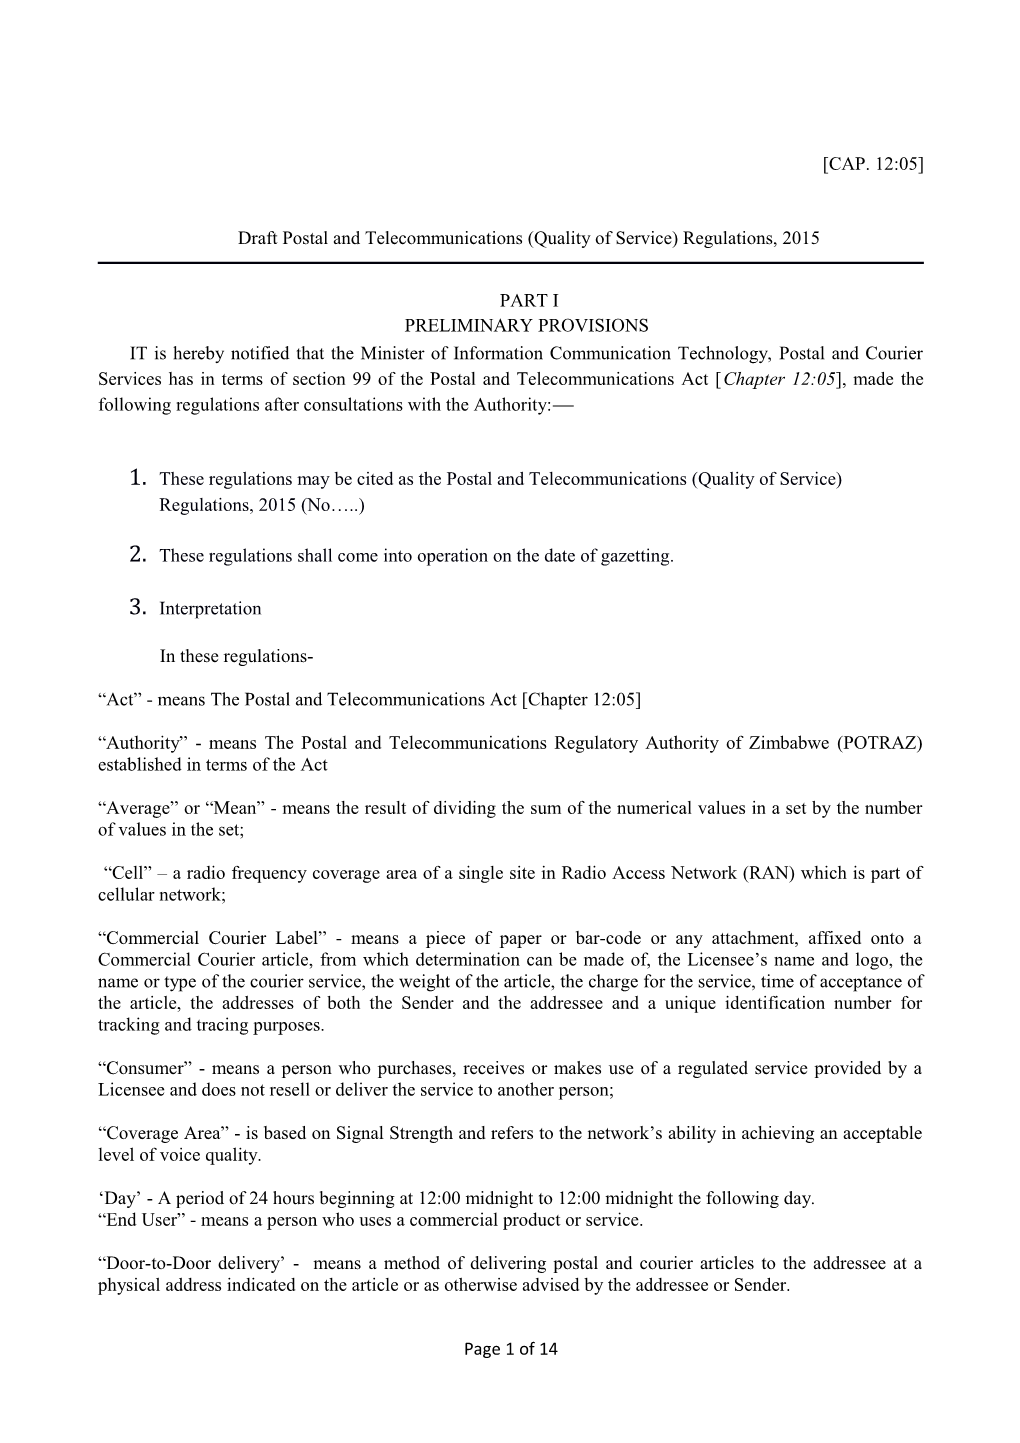 Draft Postal and Telecommunications (Quality of Service) Regulations, 2015